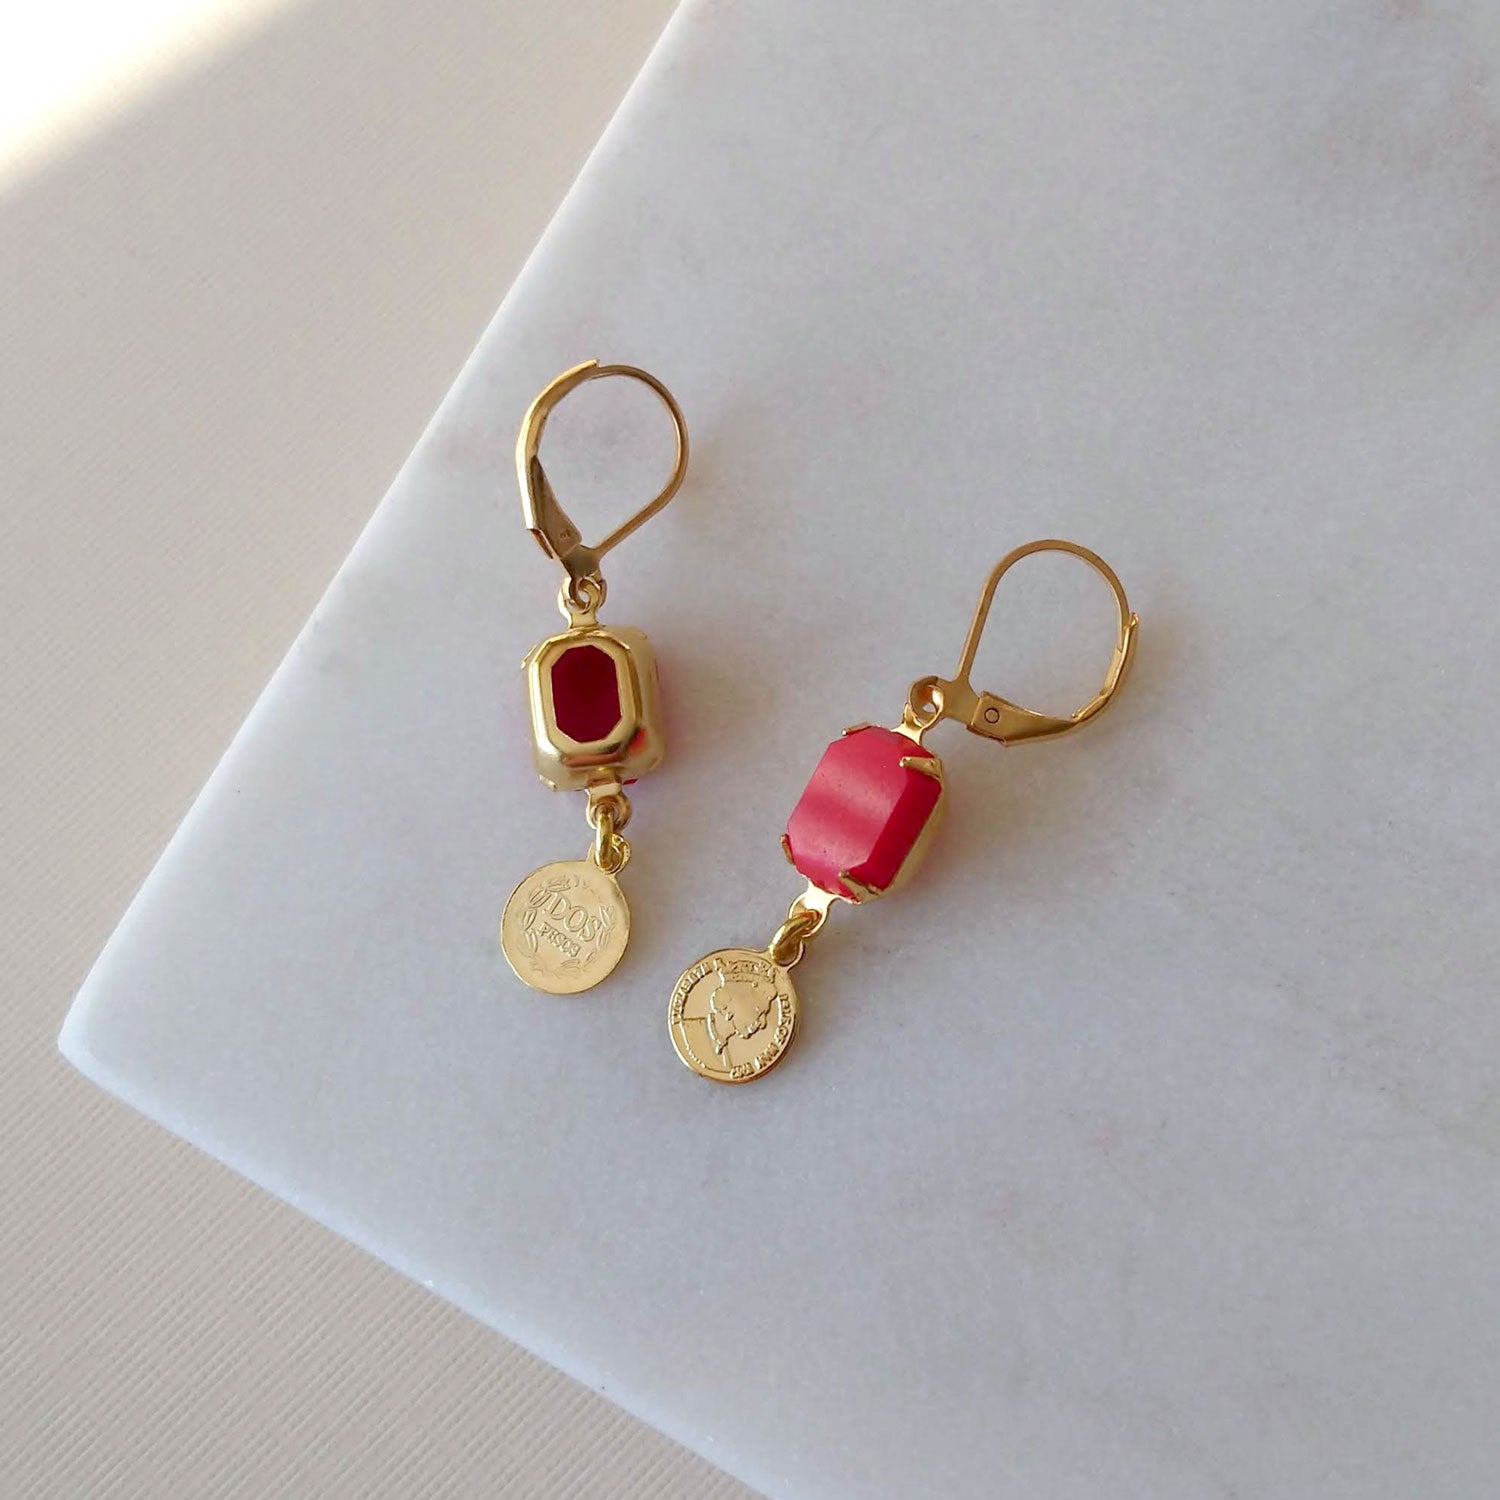 back of the lucky charm earrings